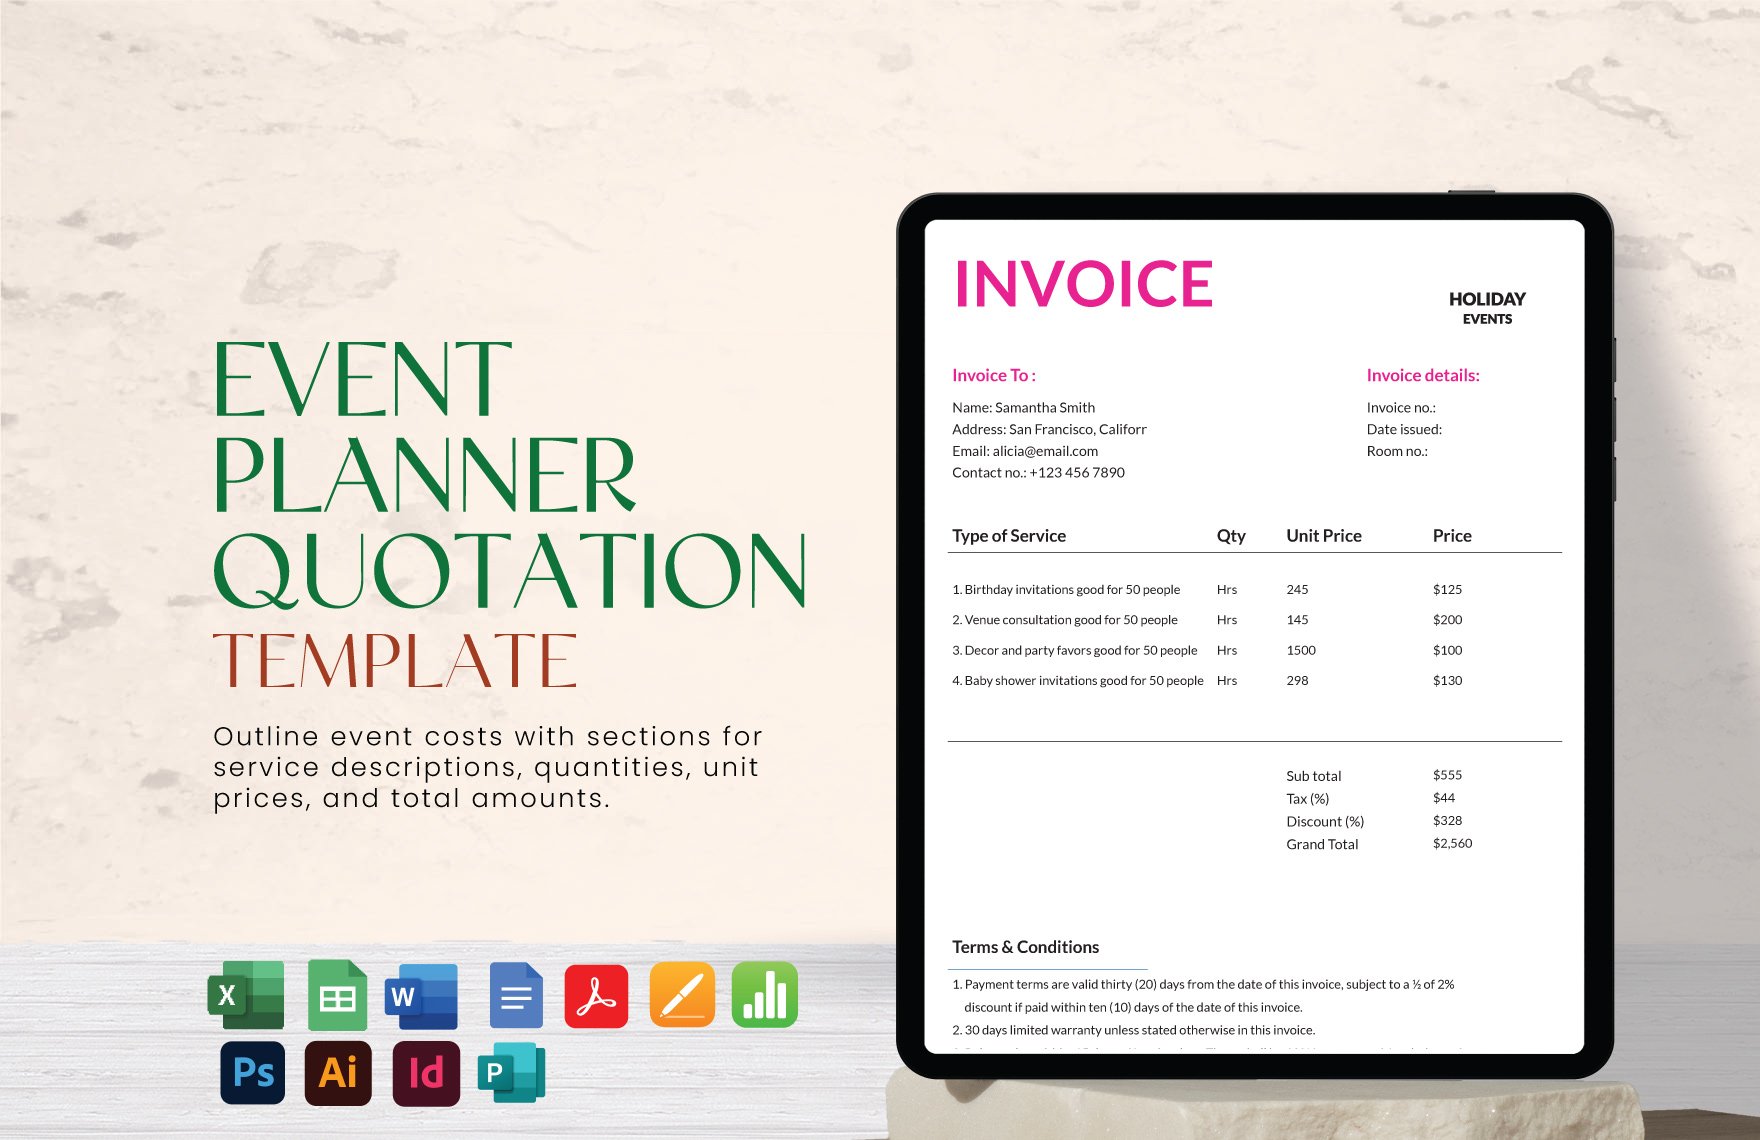 Event Planner Quotation Template in Word, Google Docs, Excel, PDF, Google Sheets, Illustrator, PSD, Apple Pages, Publisher, InDesign, Apple Numbers